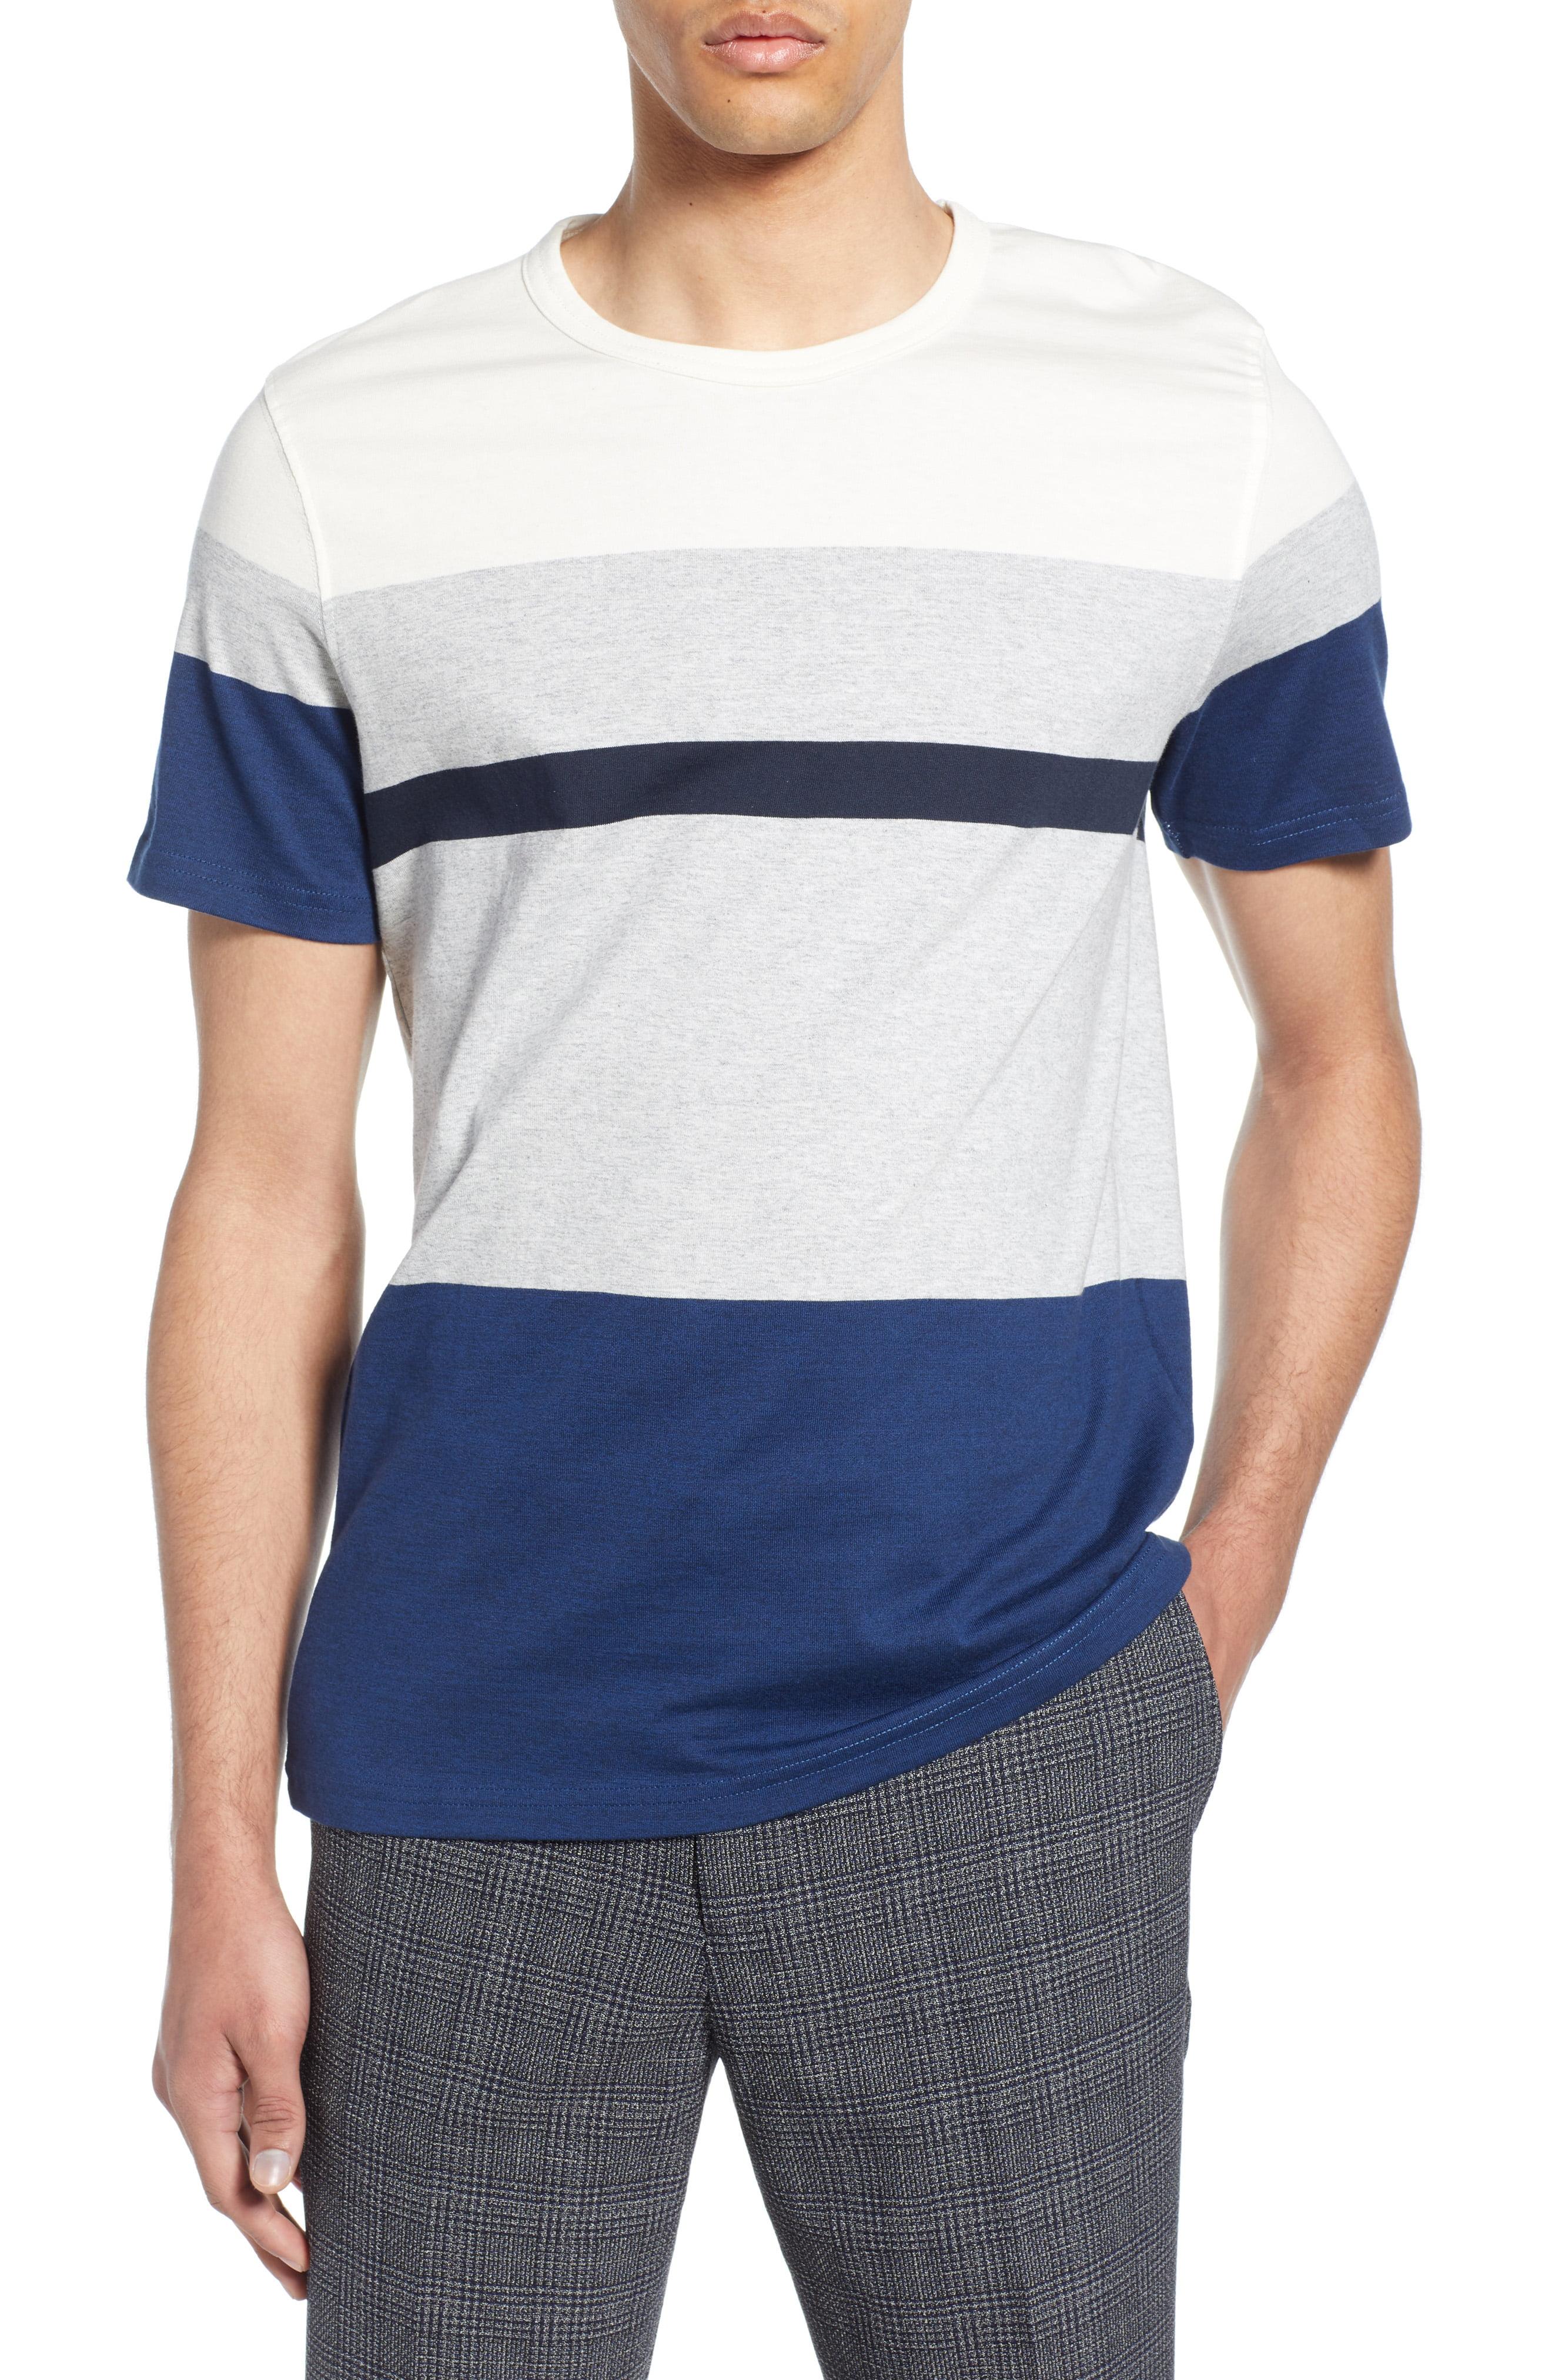 SELECTED Colorblock T-shirt in Blue for Men - Lyst